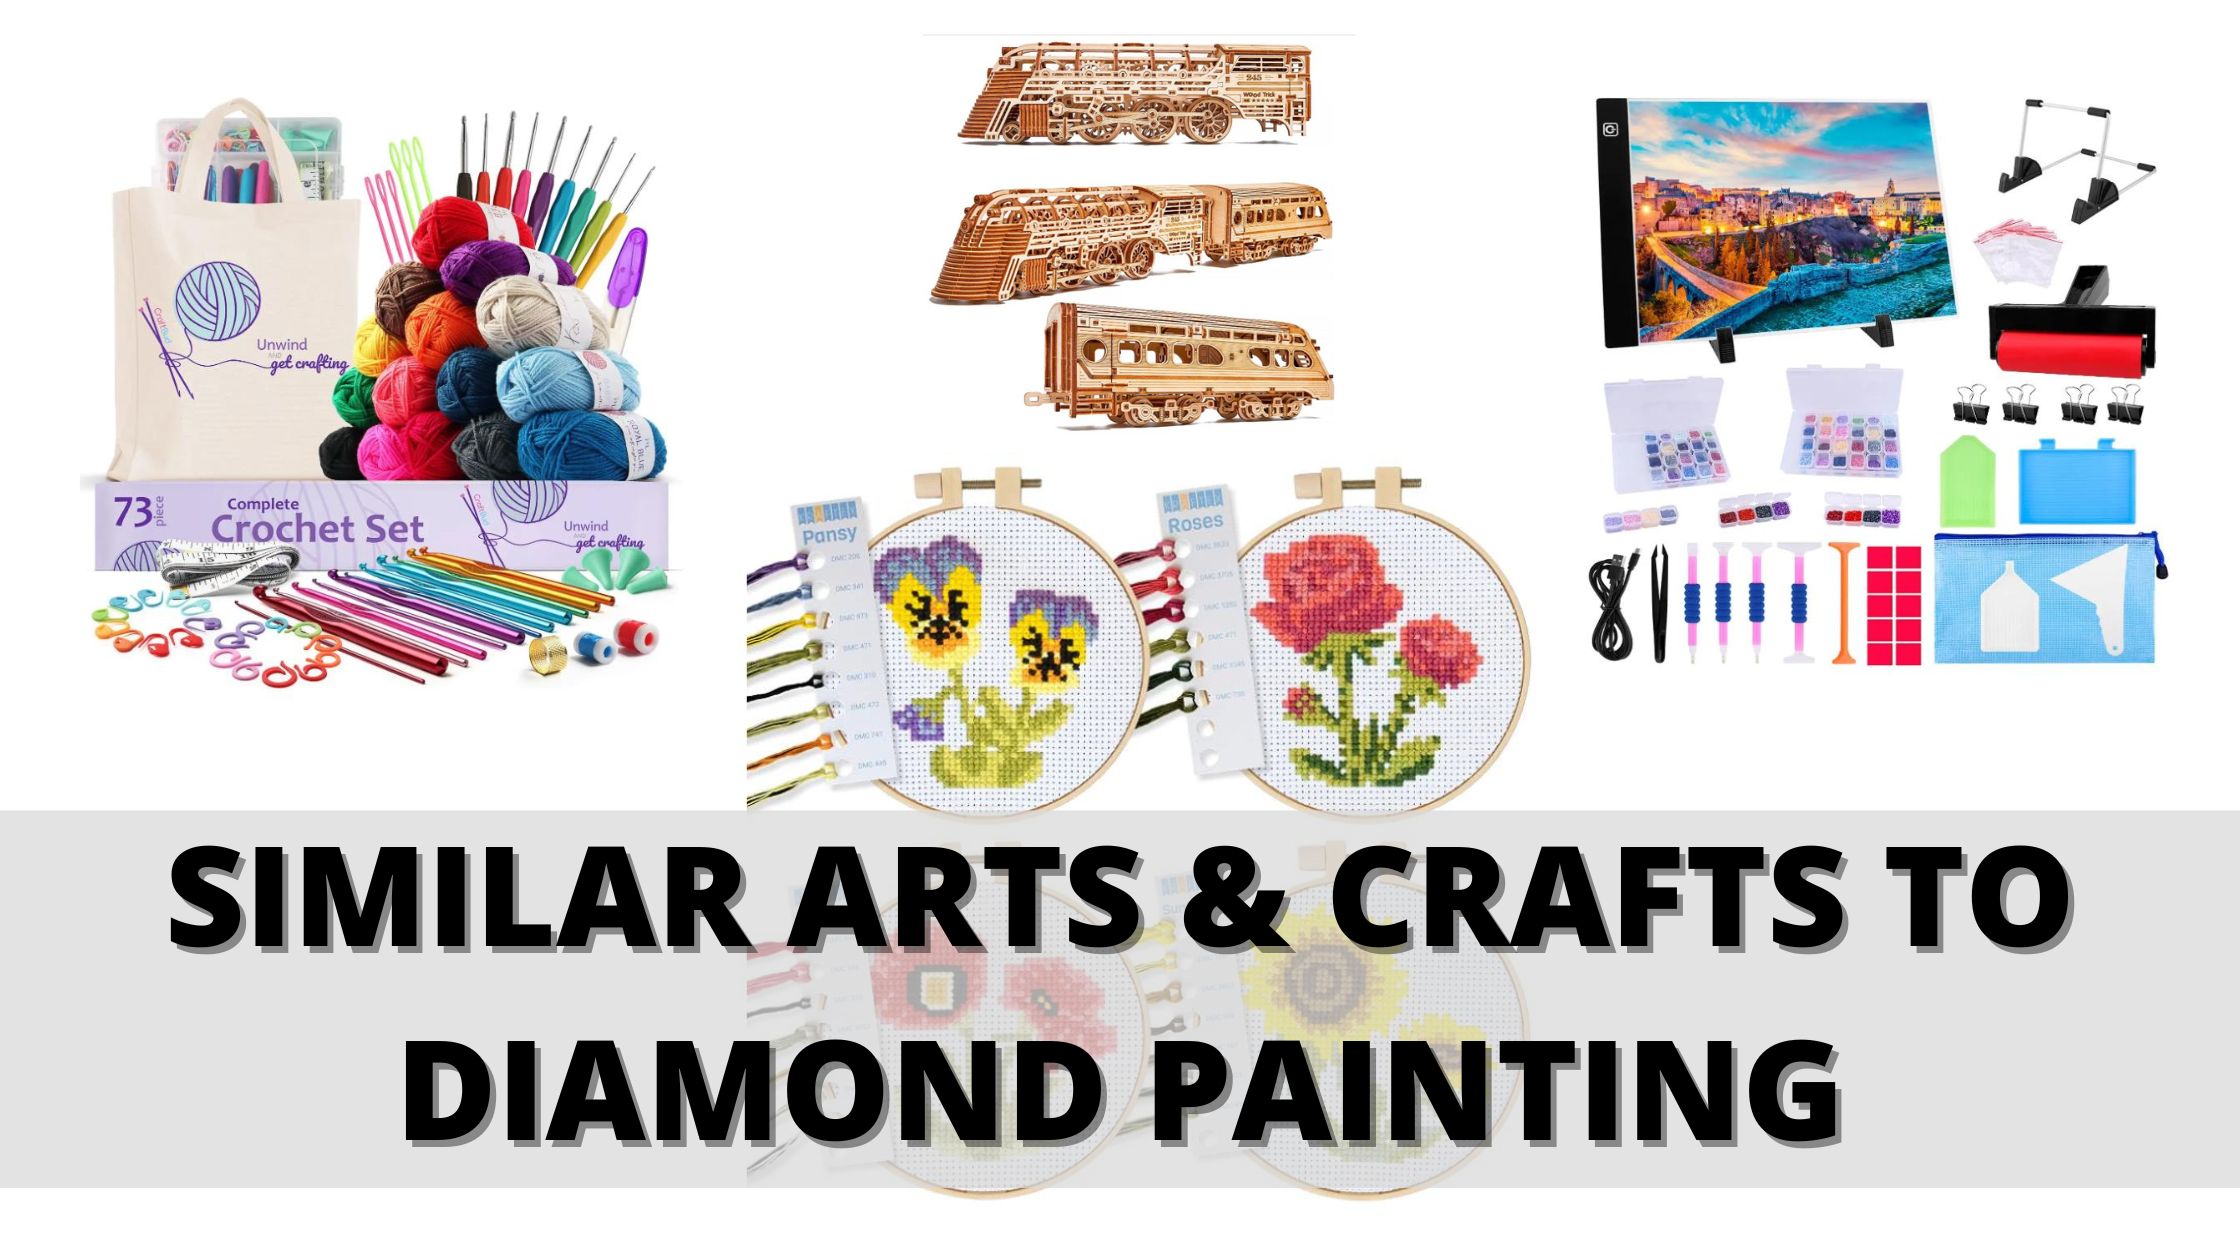 Paint With Diamonds For Beginners, What Is Diamond Painting– Craft